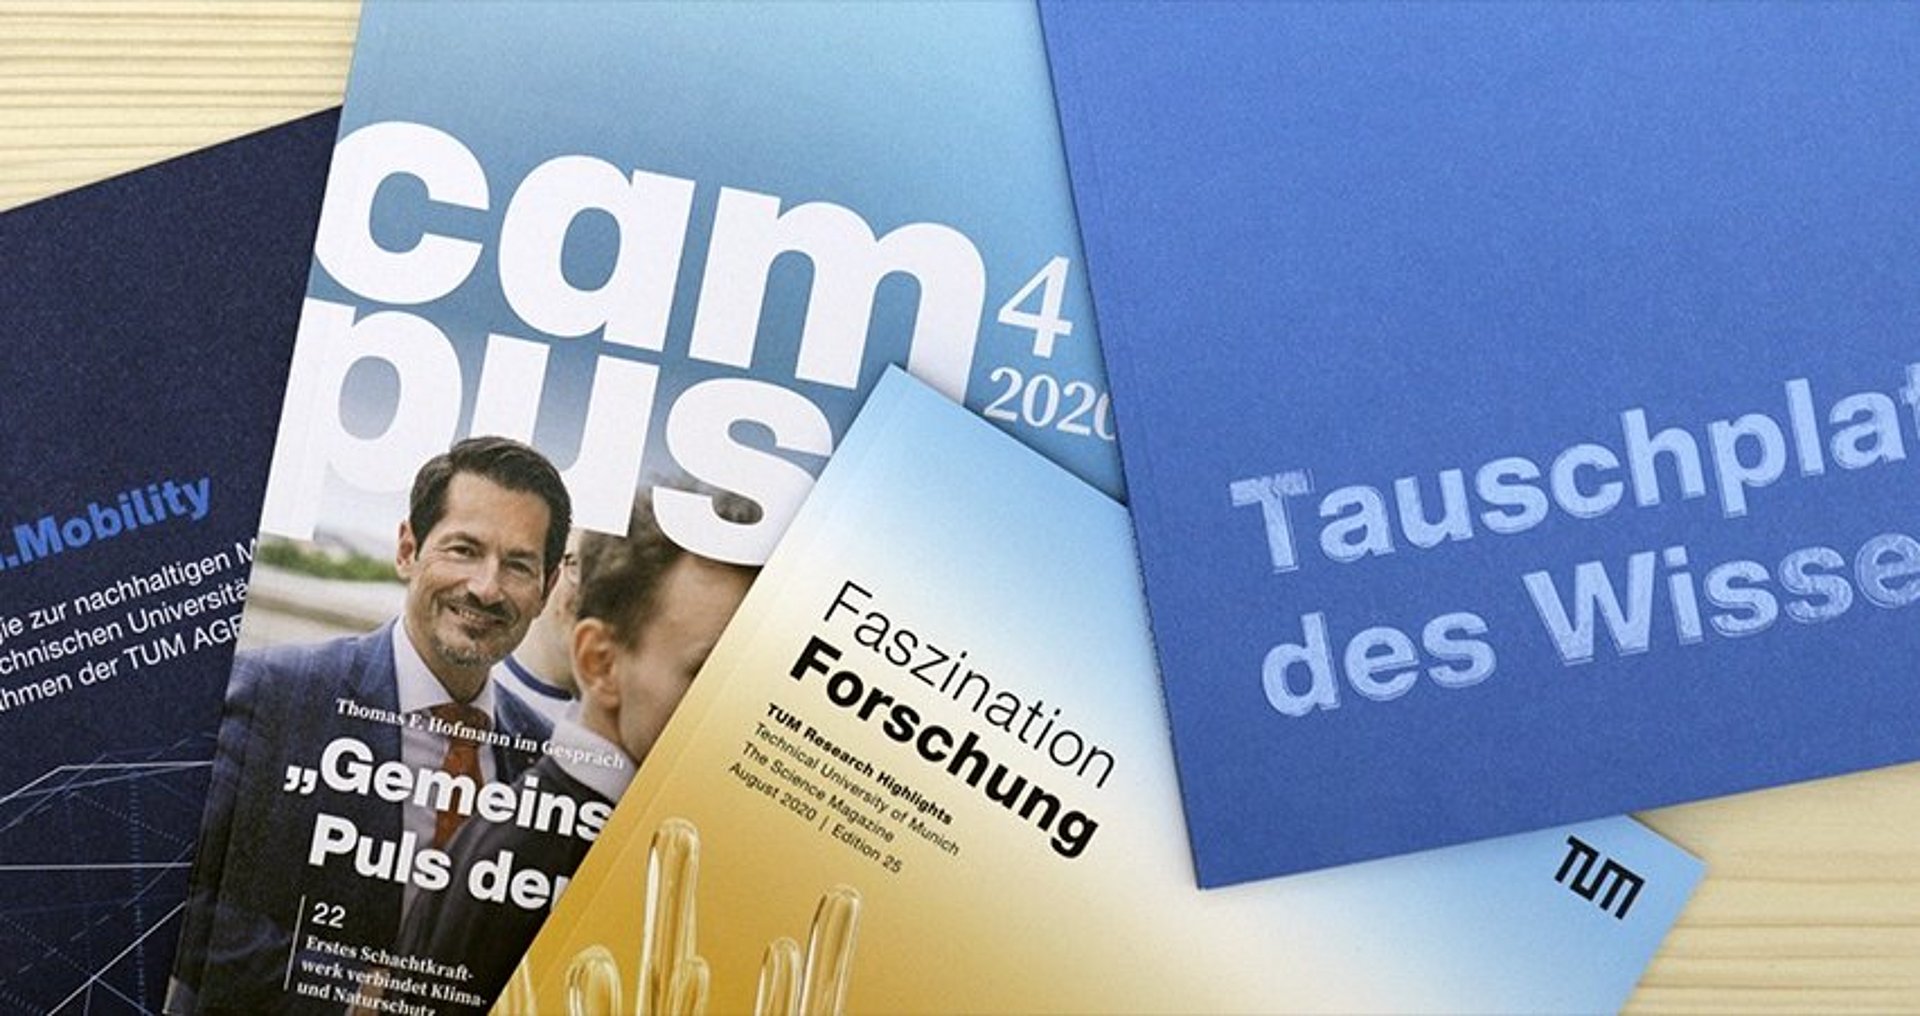 Selection of current print magazines and brochures of the Technical University of Munich